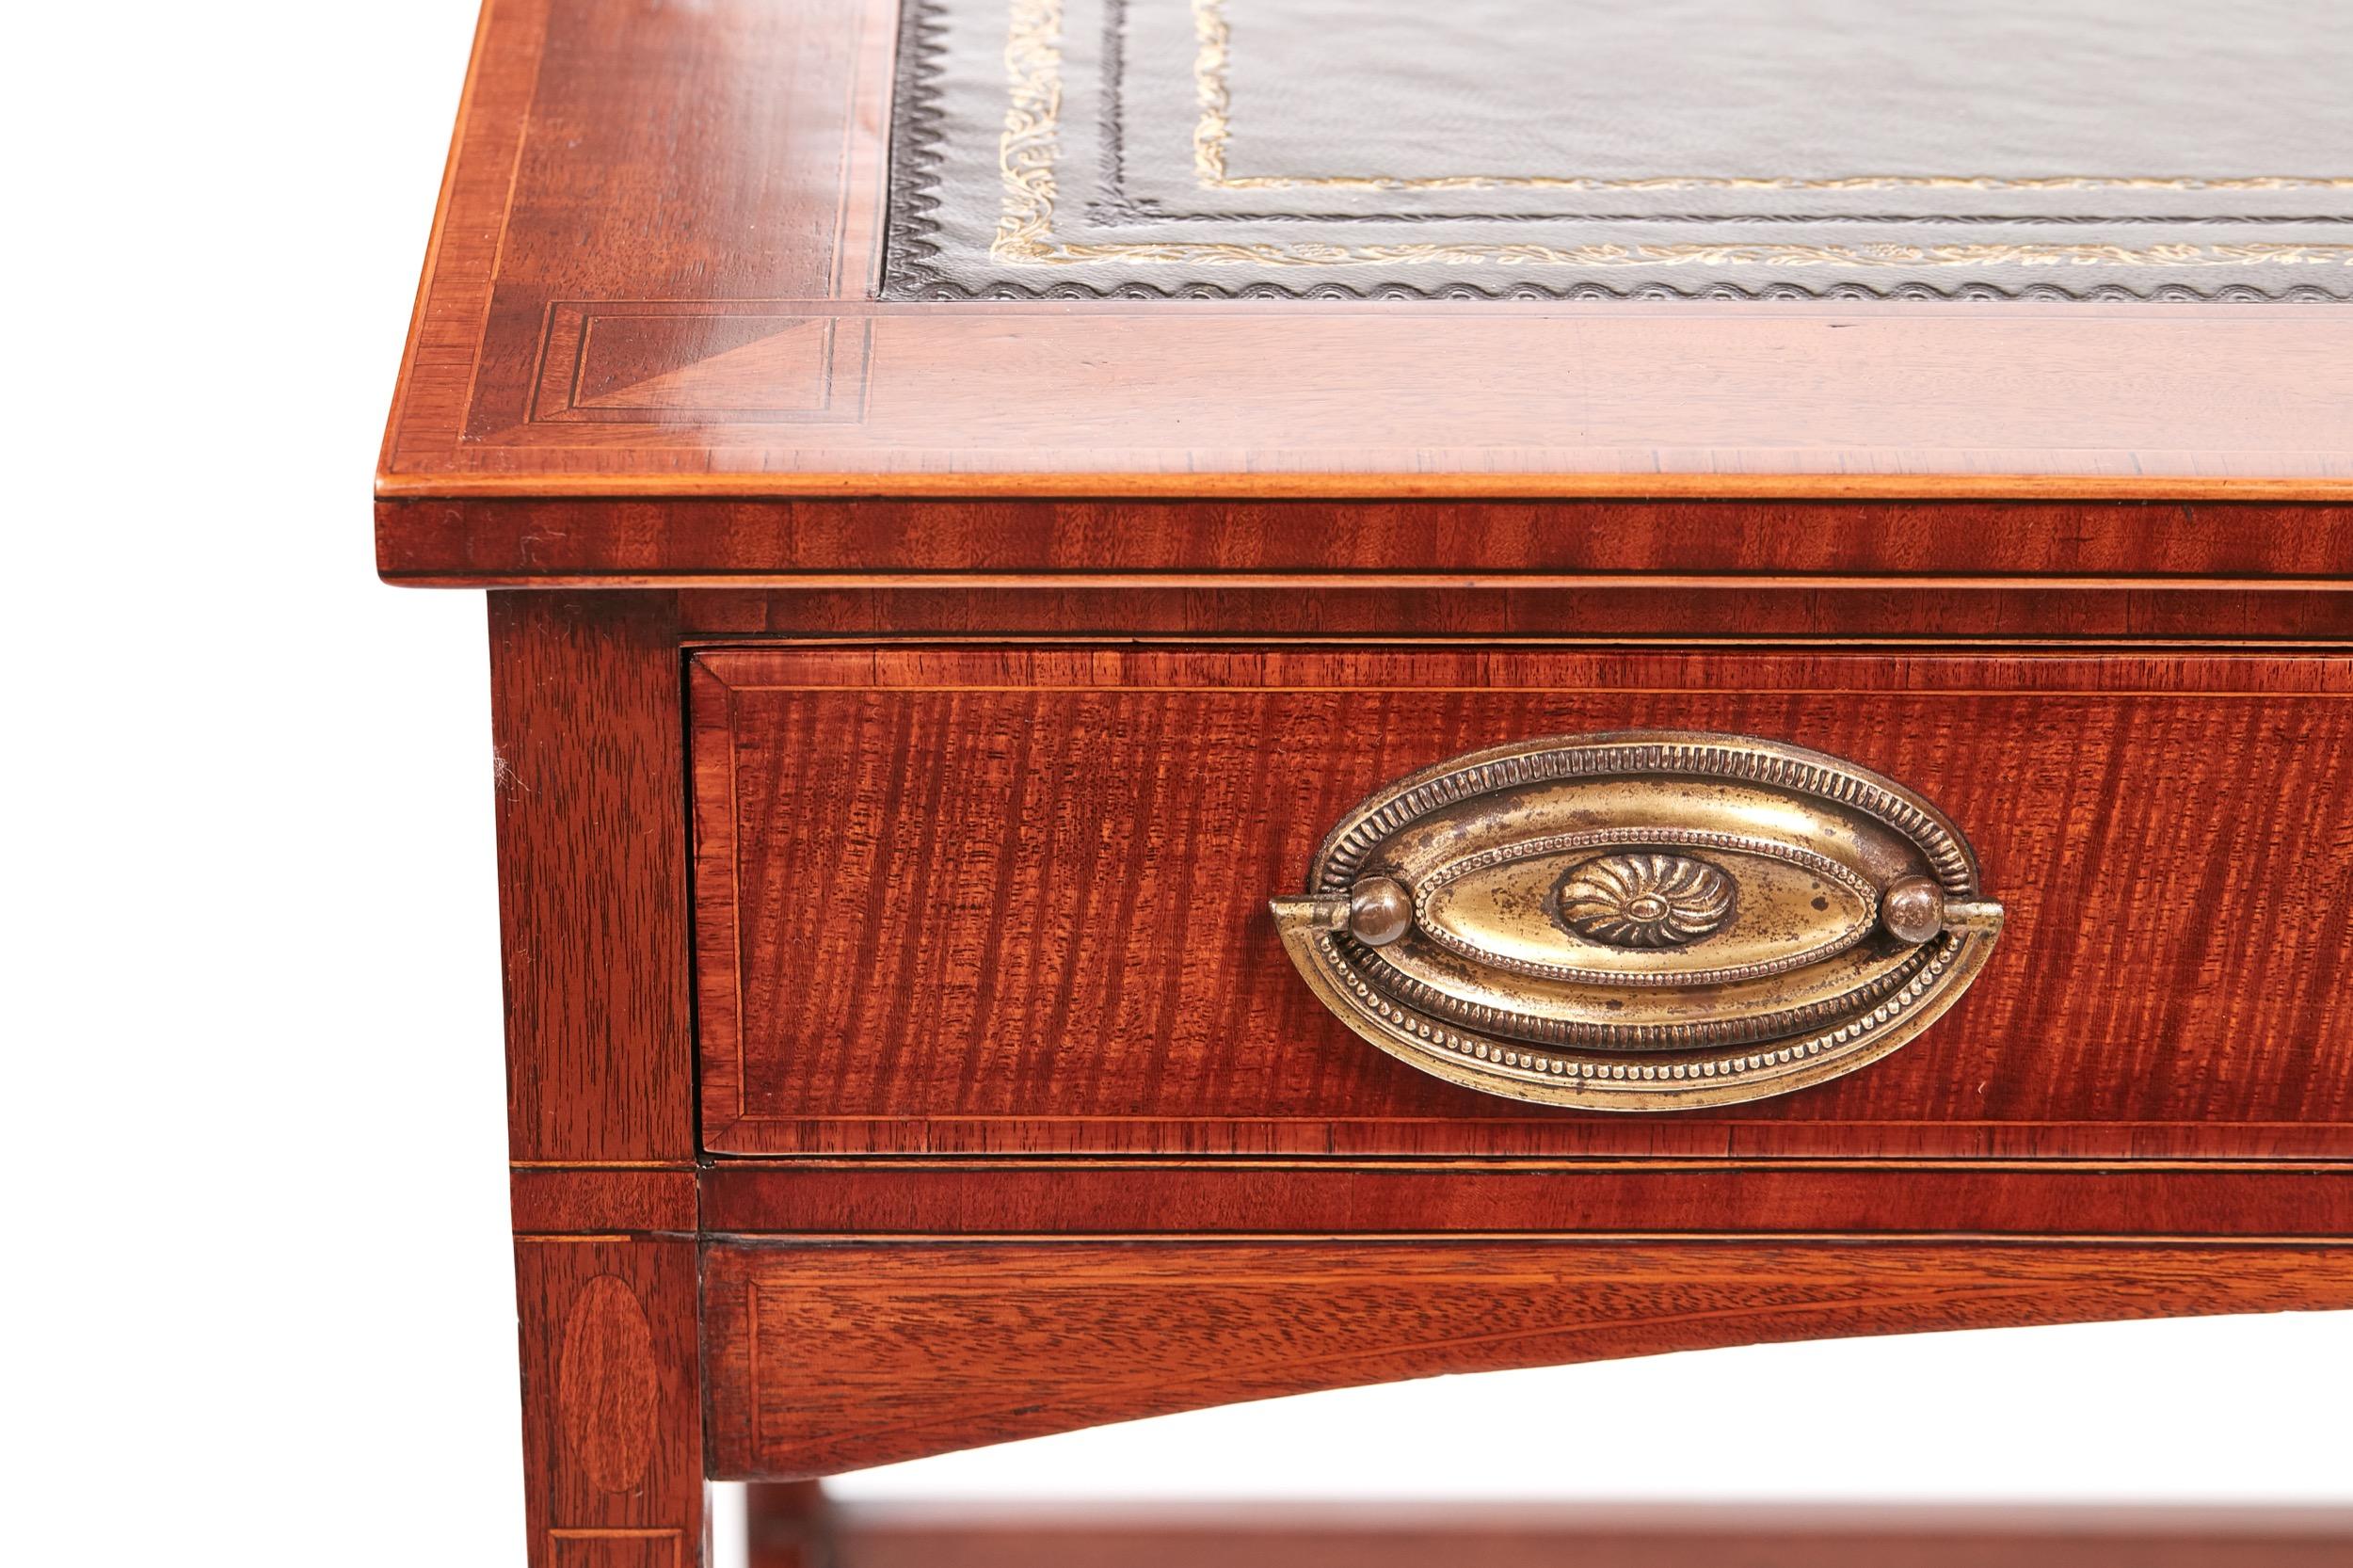 Quality Edwardian Mahogany Inlaid Freestanding Pedestal Desk In Excellent Condition For Sale In Stutton, GB